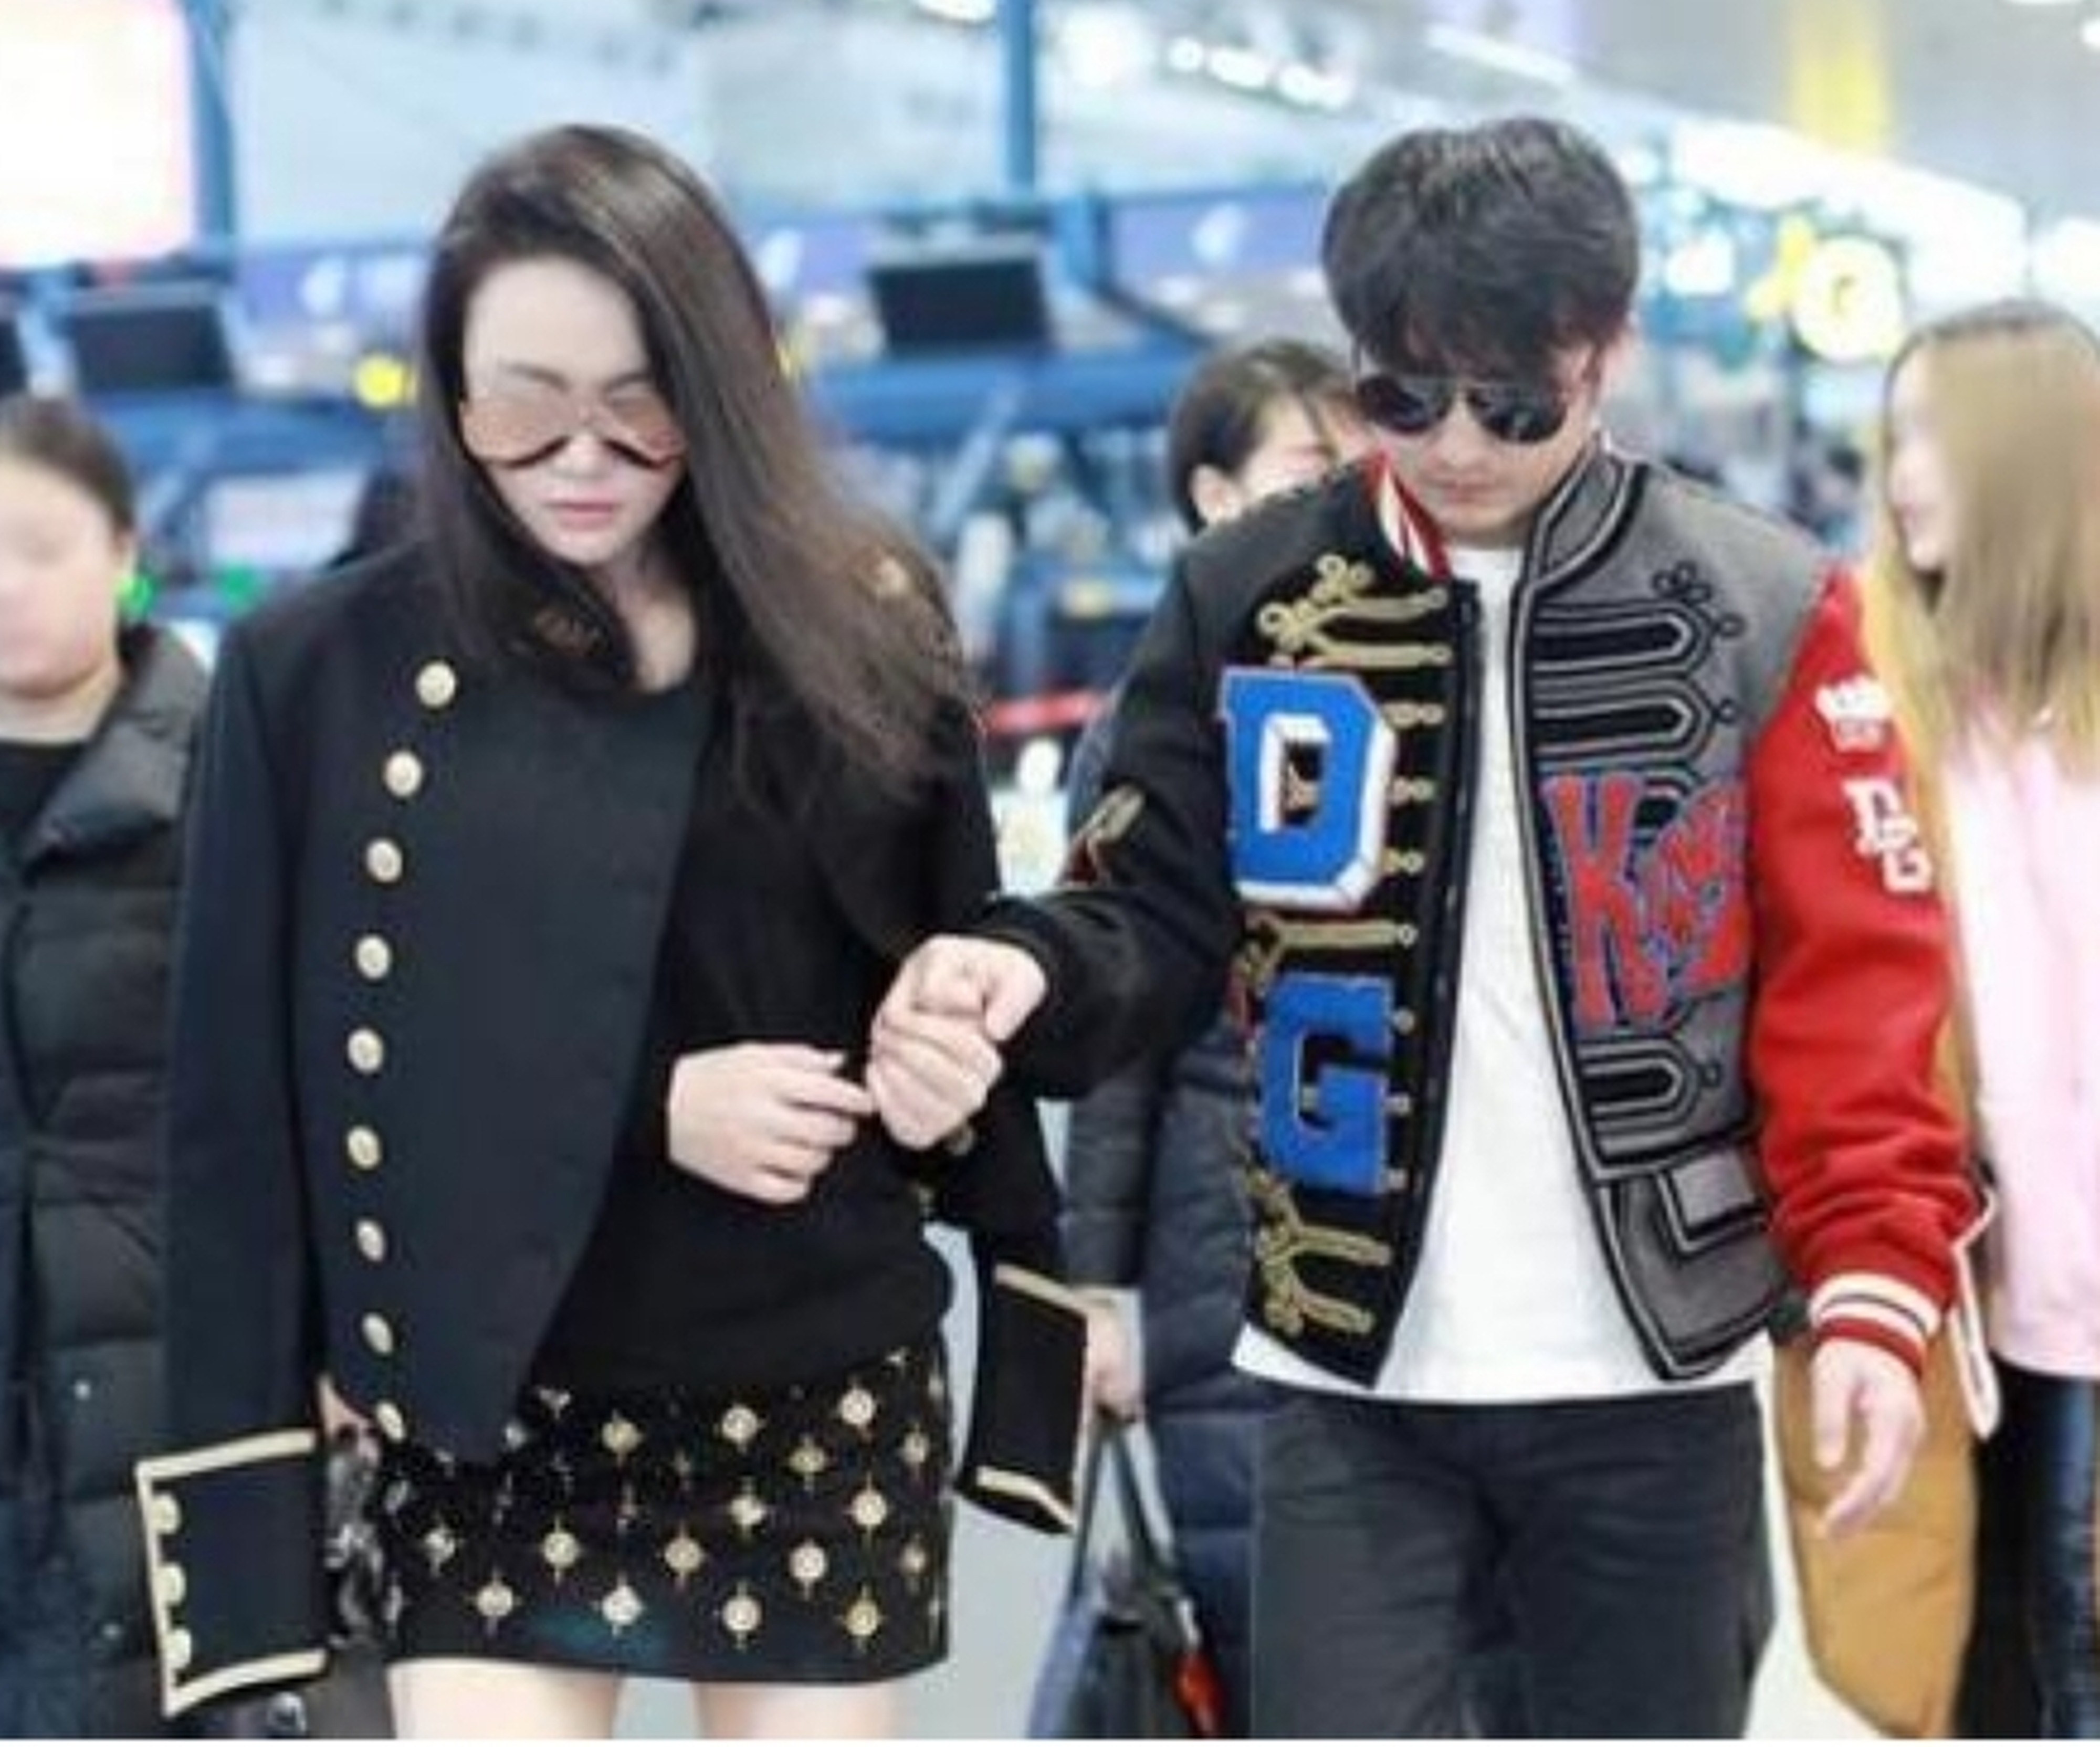 Chinese boxer Zou Shiming and wife Ran Yingying arrive in Shanghai to seek medical help for a suspected detached retina. Photo: Sina.com.cn